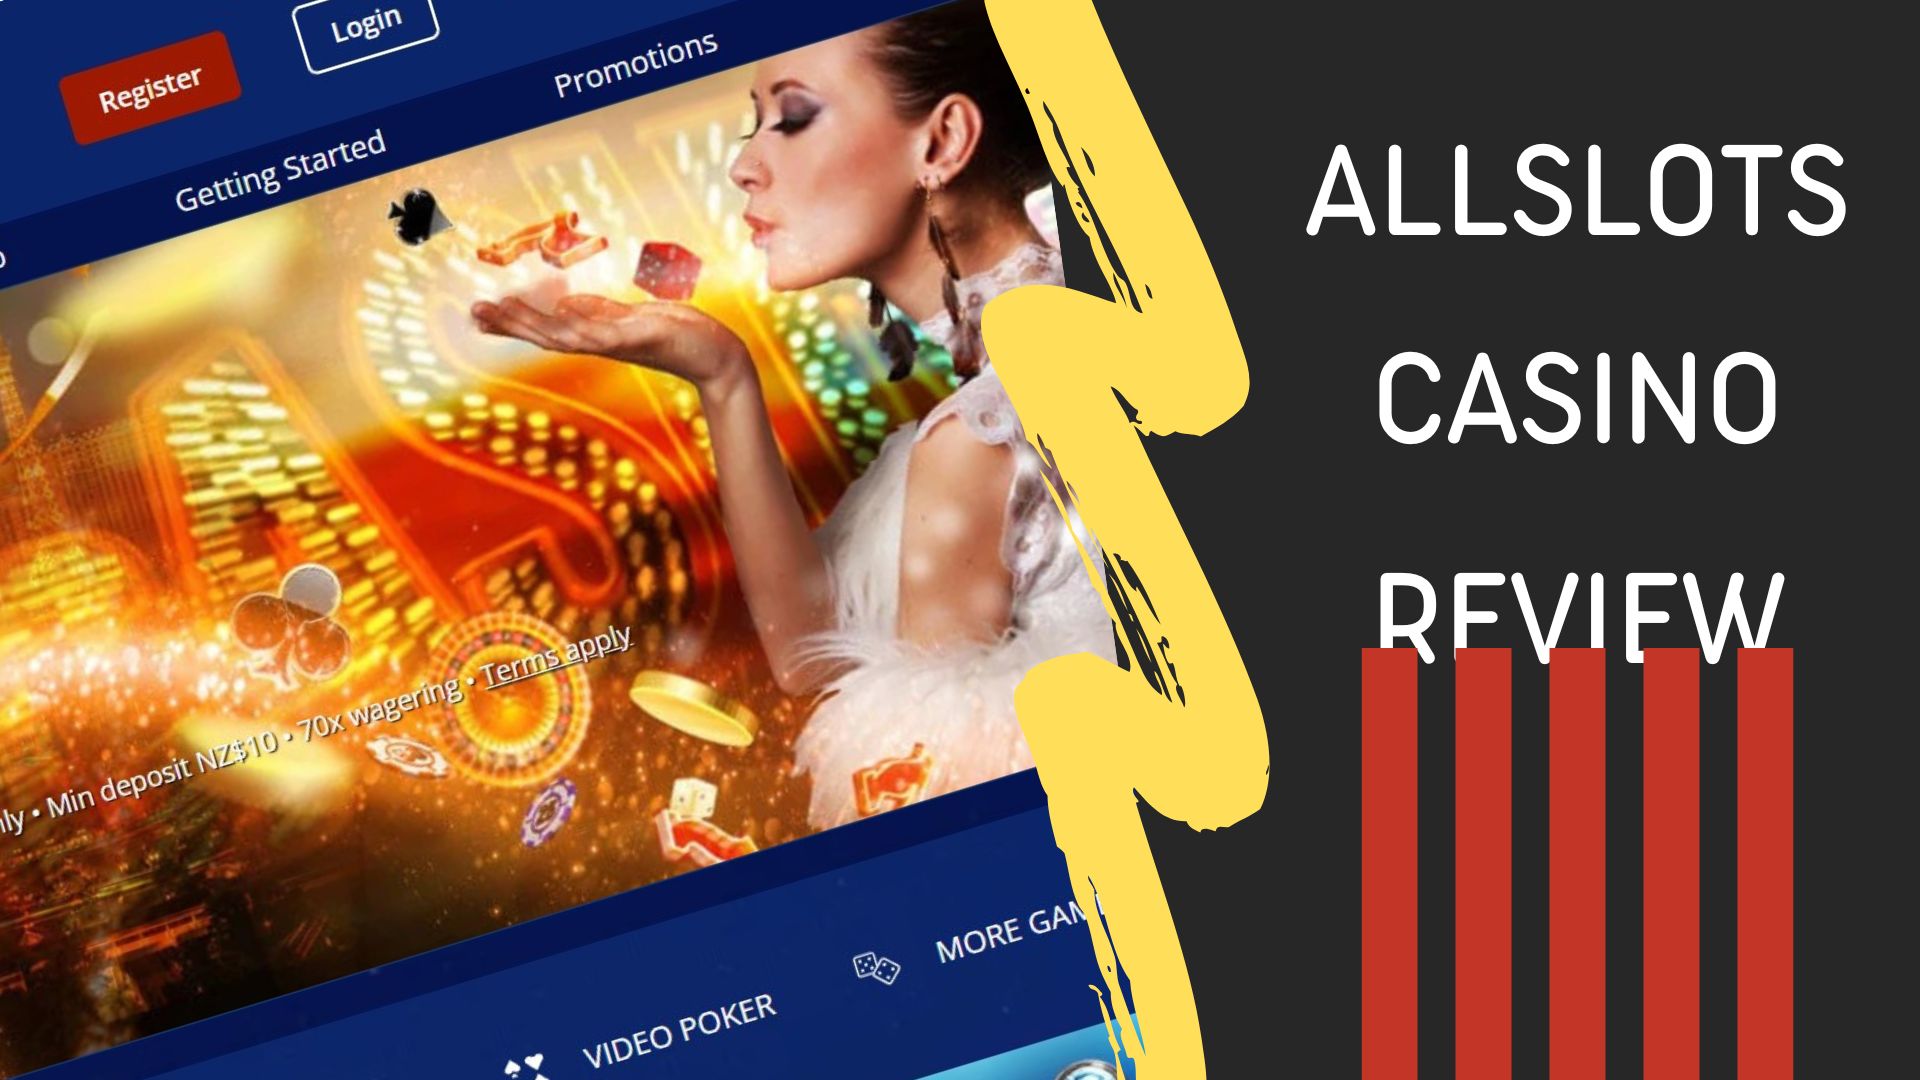 All Slots casino in New Zealand